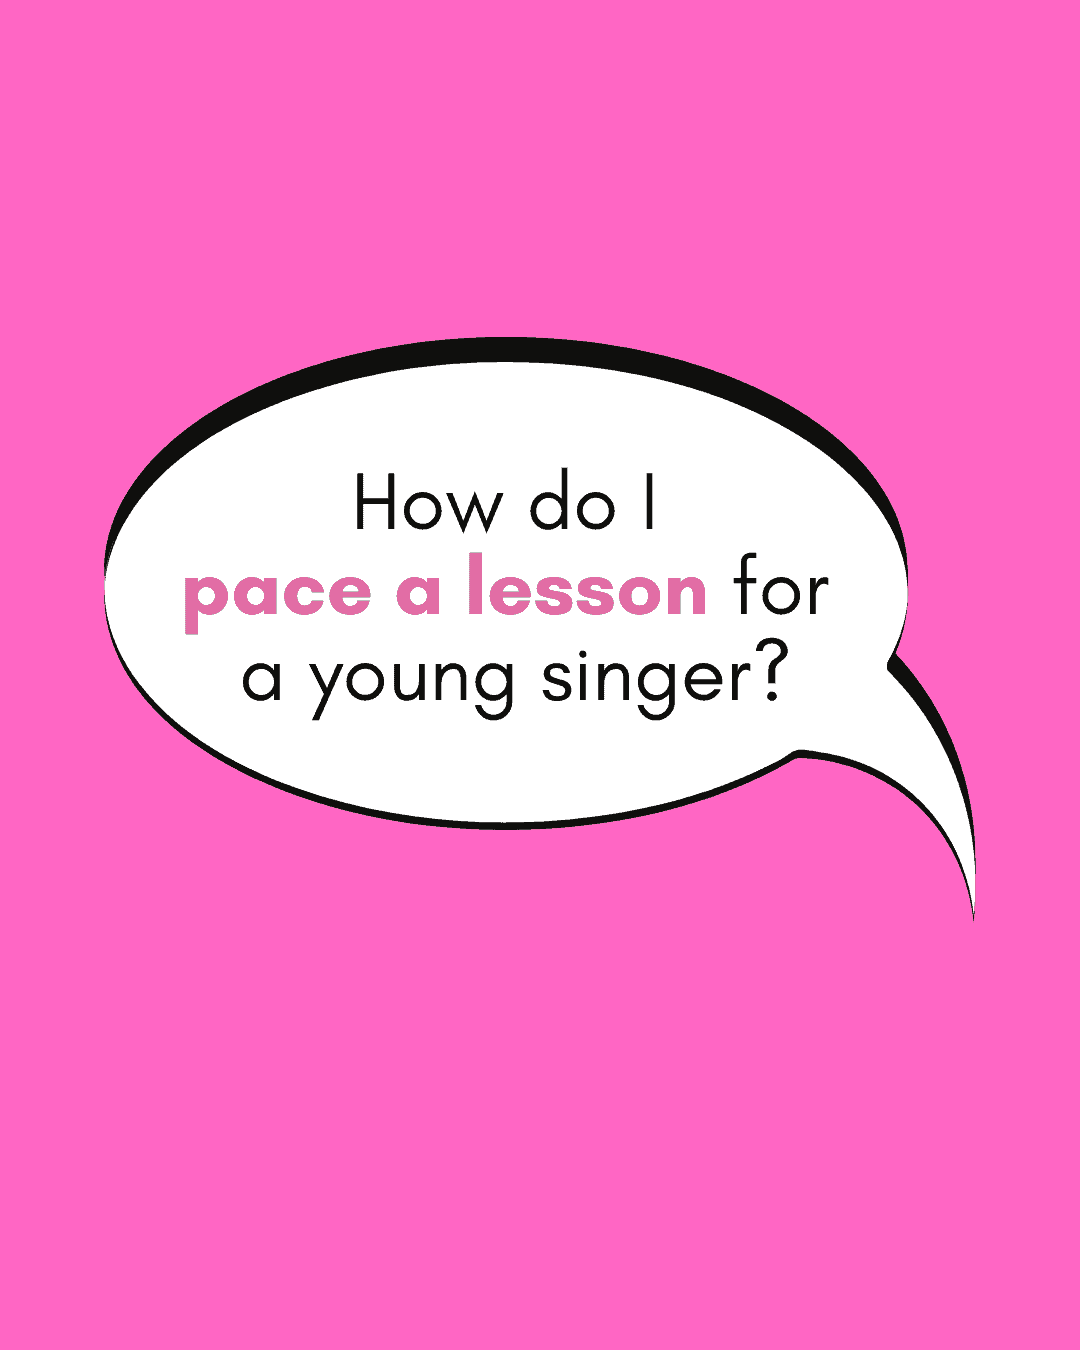 Happy Singing Teacher Course:  Getting Started with Young Singers Ages 6 to 10